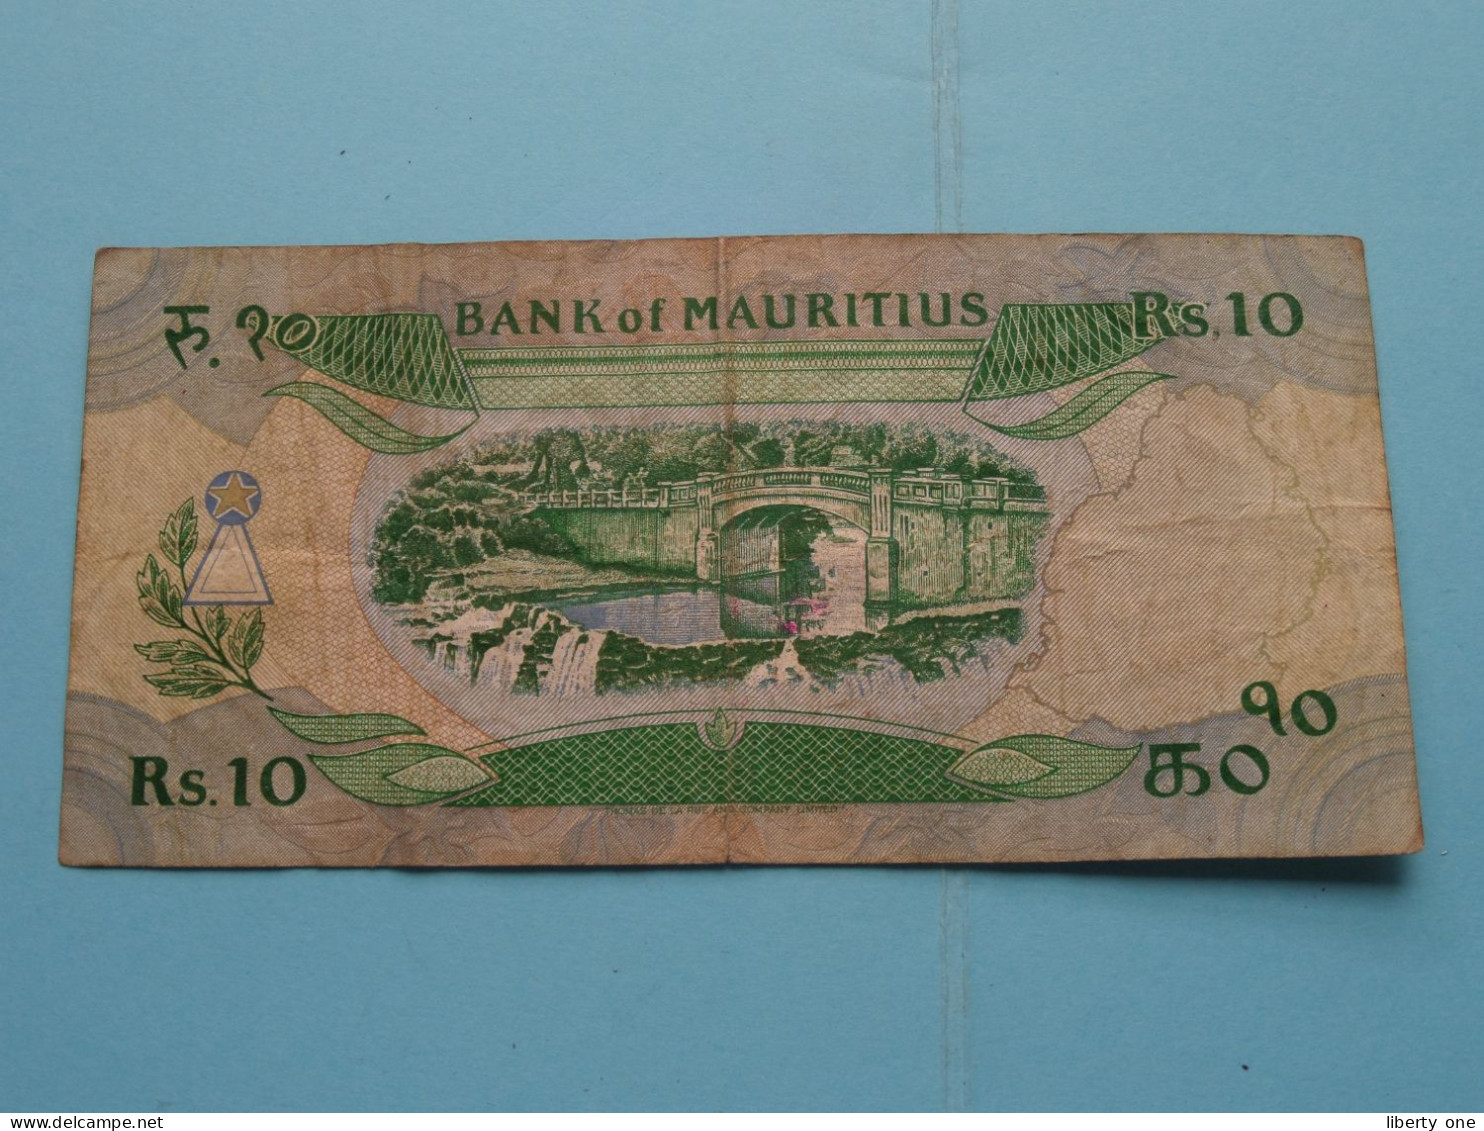 10 Rupees Ten ( A/12 701673 ) MAURITIUS ( For Grade See SCAN ) Circulated ! - Maurice